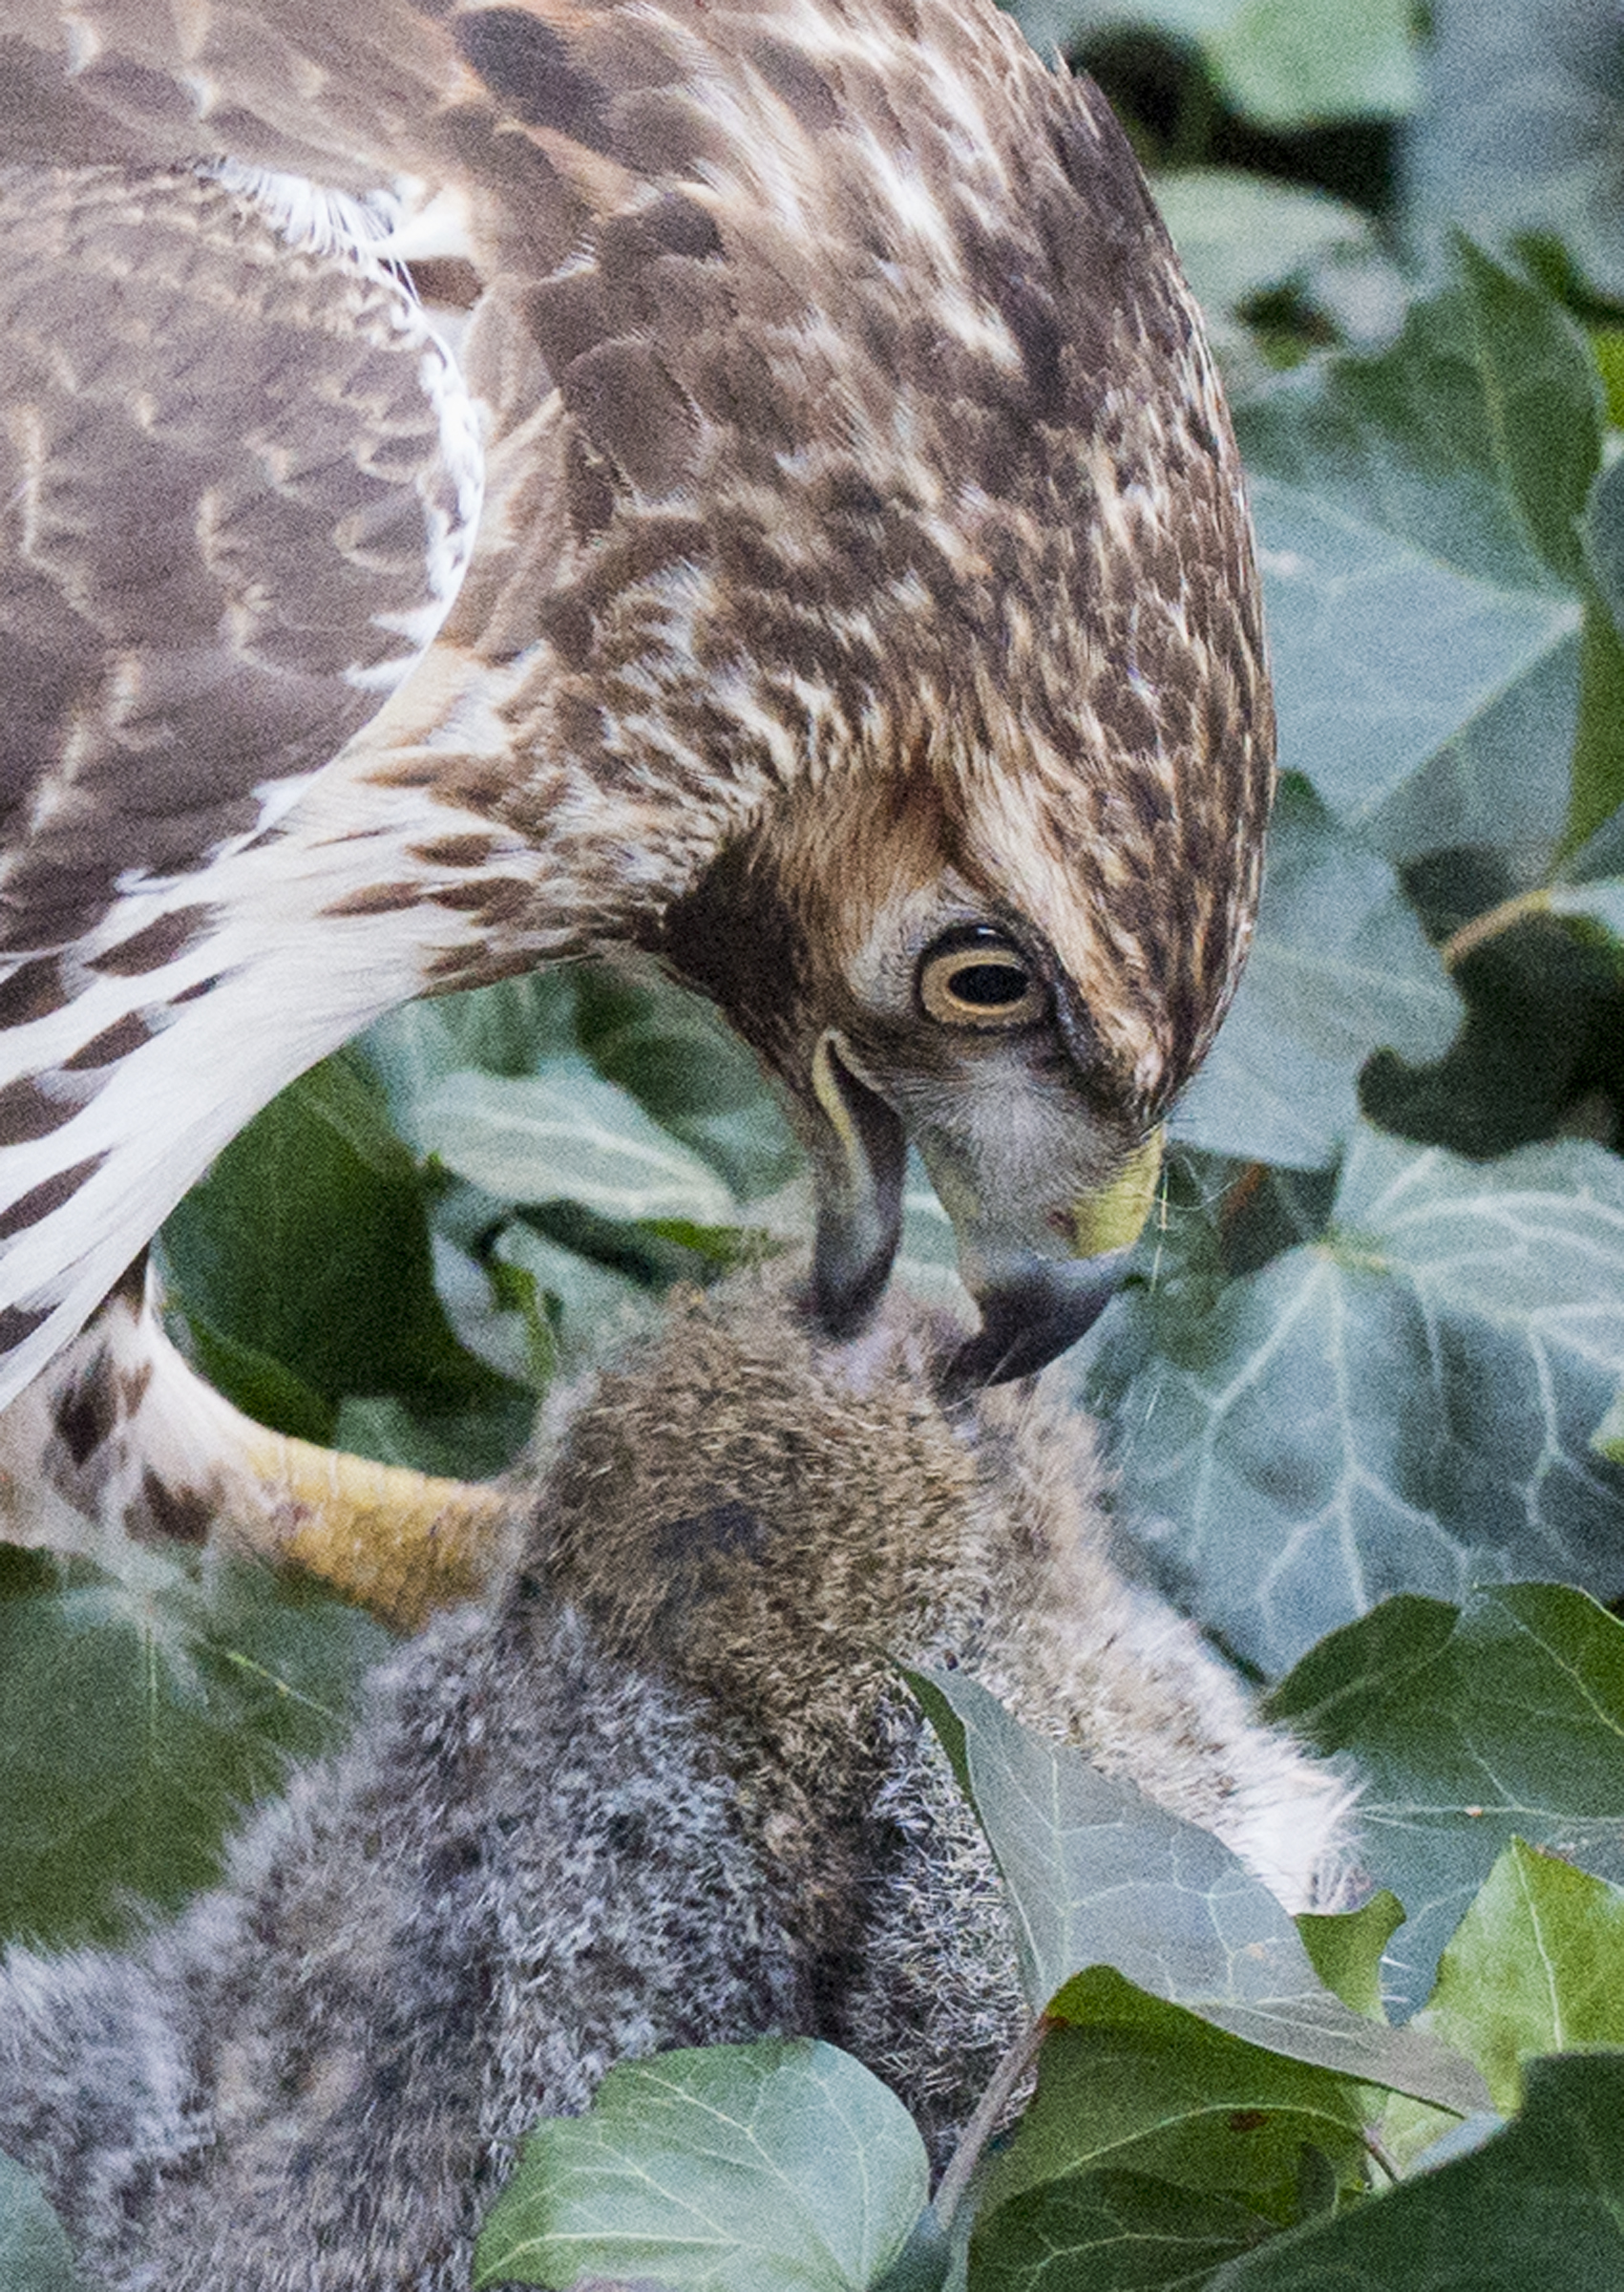 Red-tail with squirrel in ivy. Photo by Patrick Mansell.